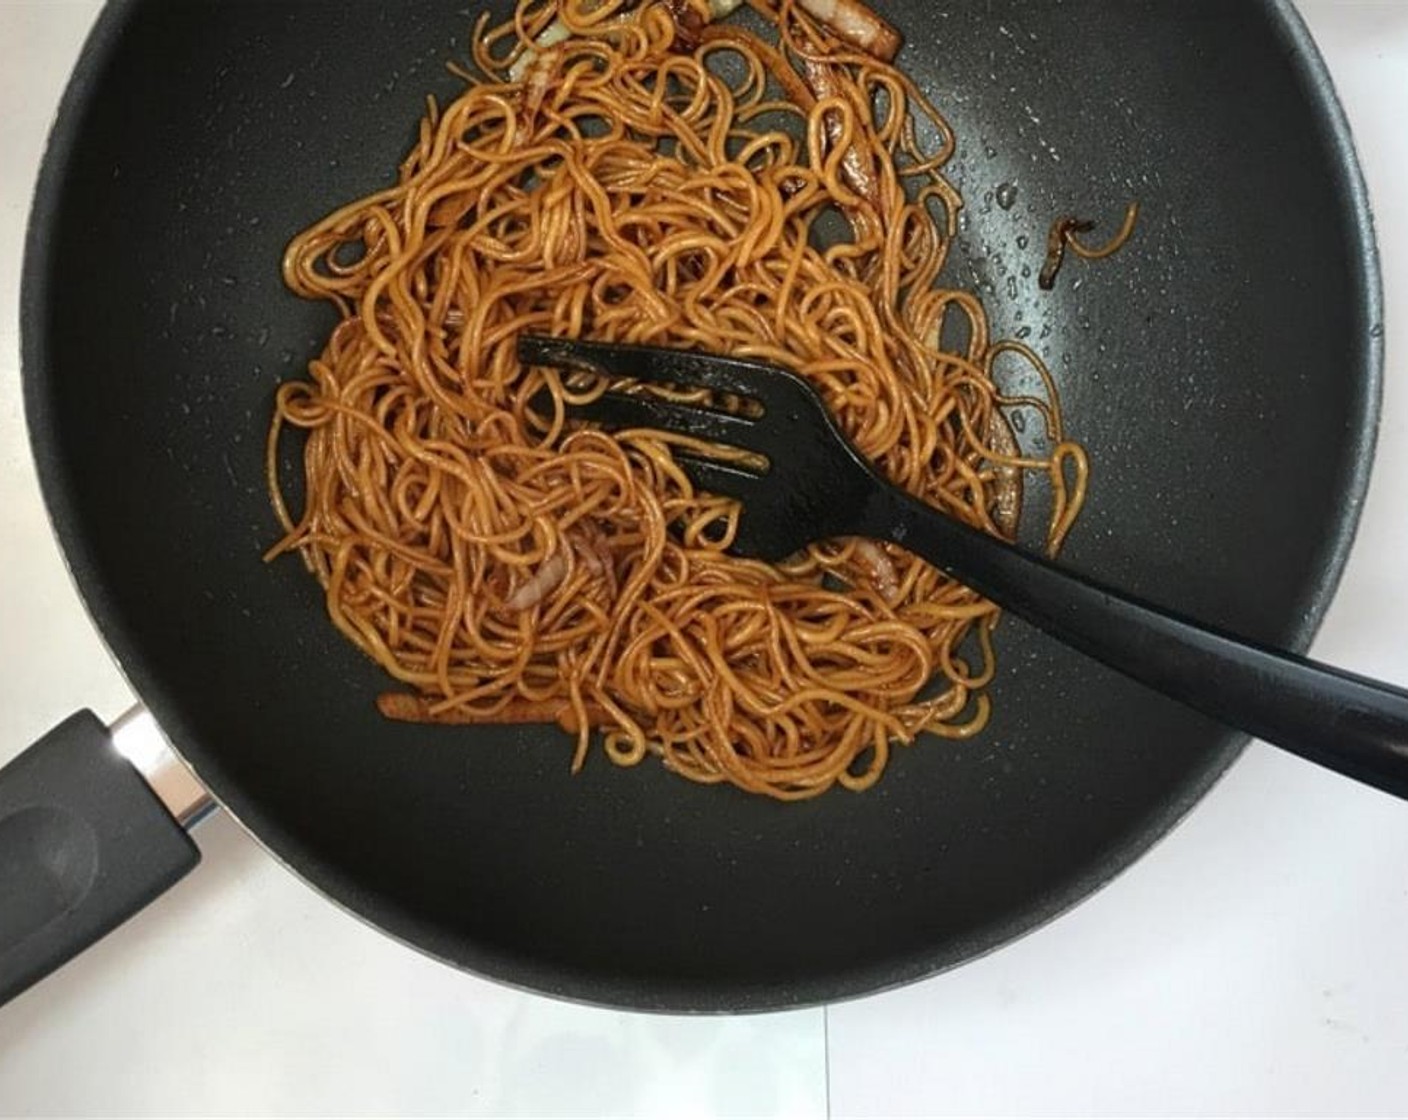 step 5 Stir fry and toss the noodles well until the soy sauce is evenly divided and has colored the noodles.